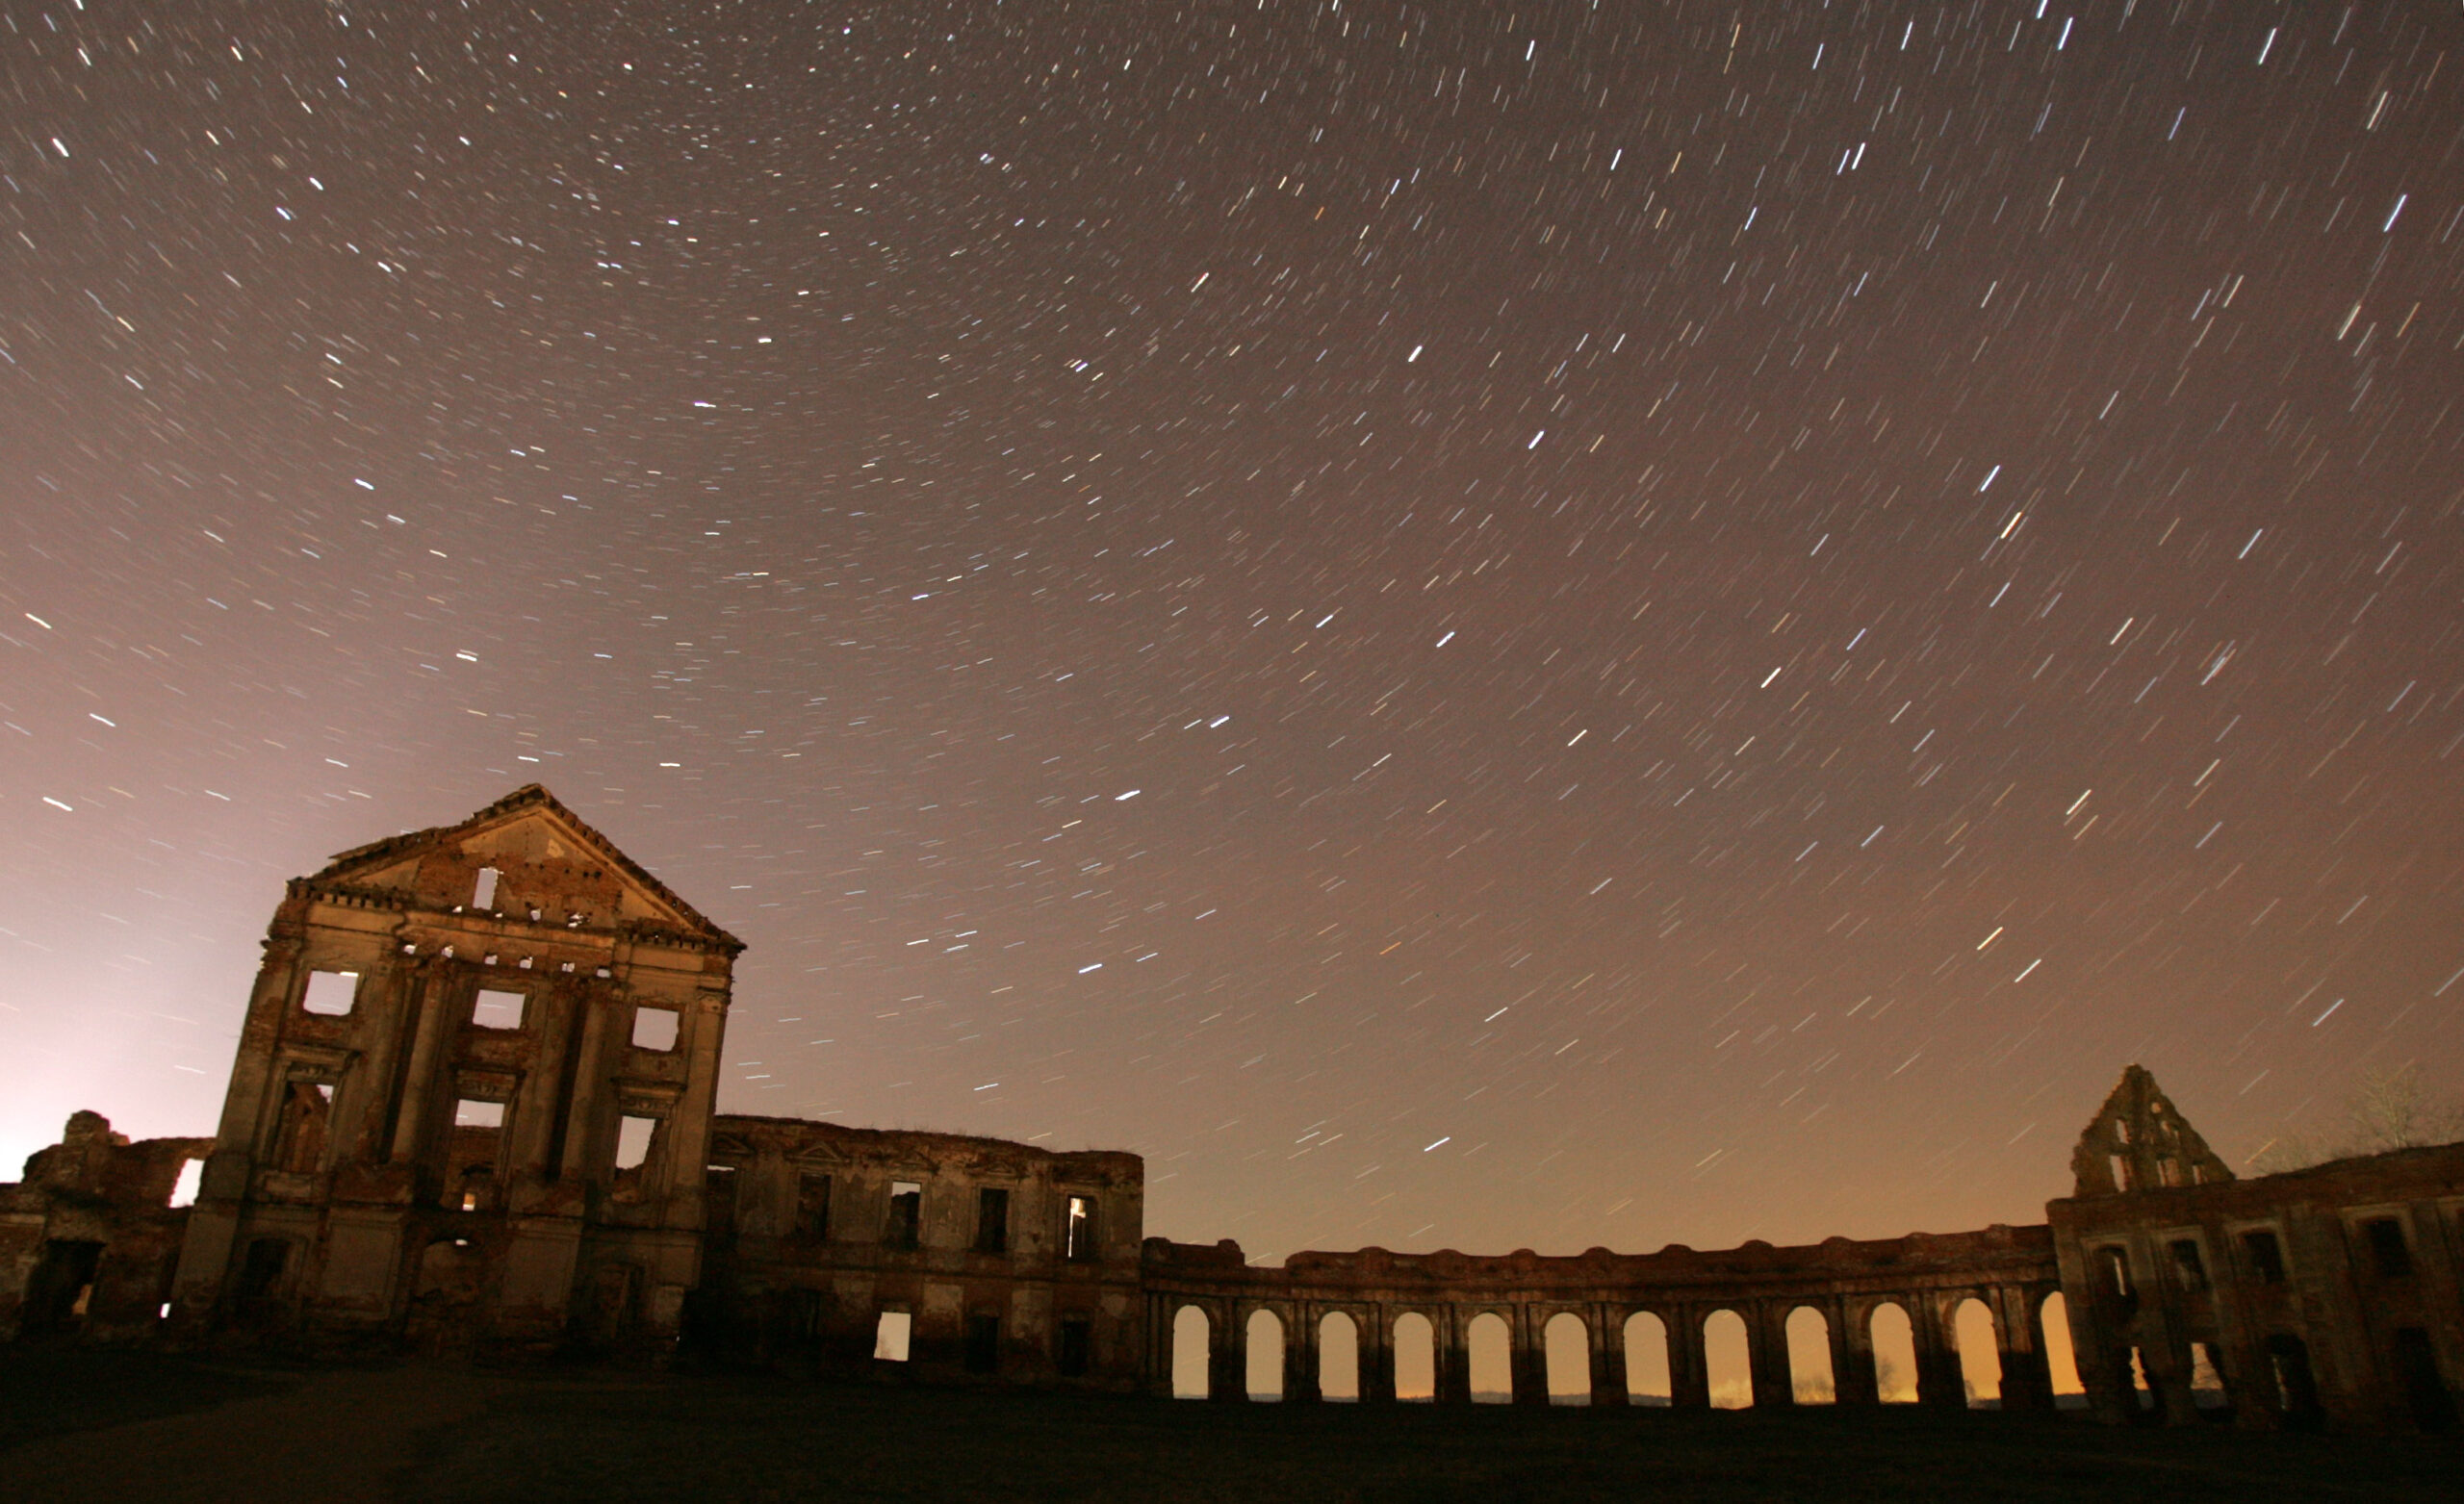 Stars are seen over the remains of Sapega's castle in Belarus